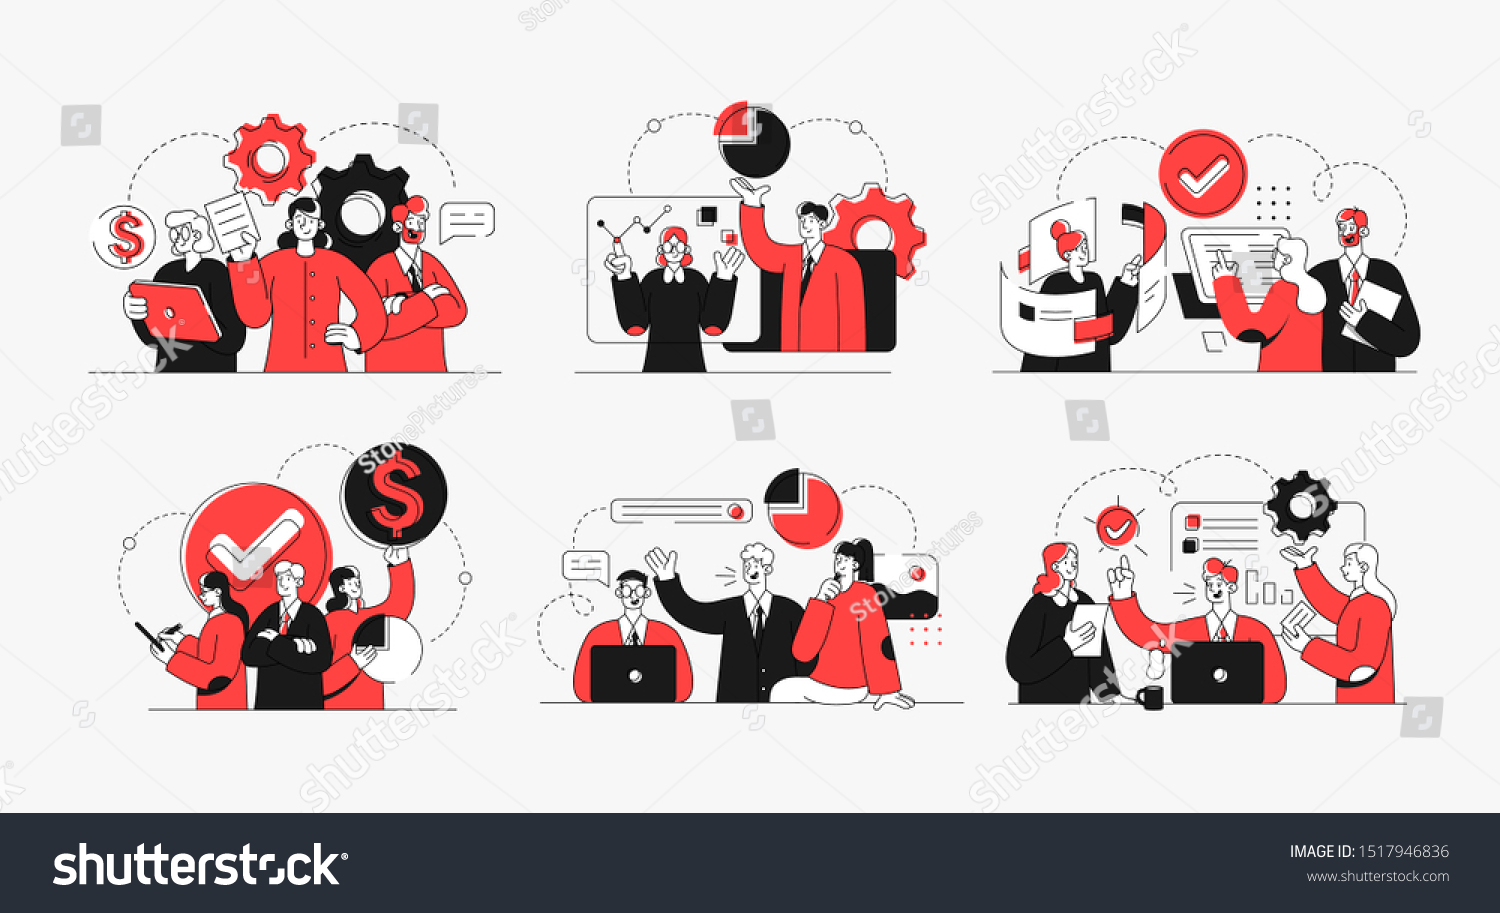 Collection of succesfull team illustrations . Bundle of men and women taking part in business meeting, negotiation, brainstorming, talking to each other. Teamwork concept outline vector illustrations. #1517946836